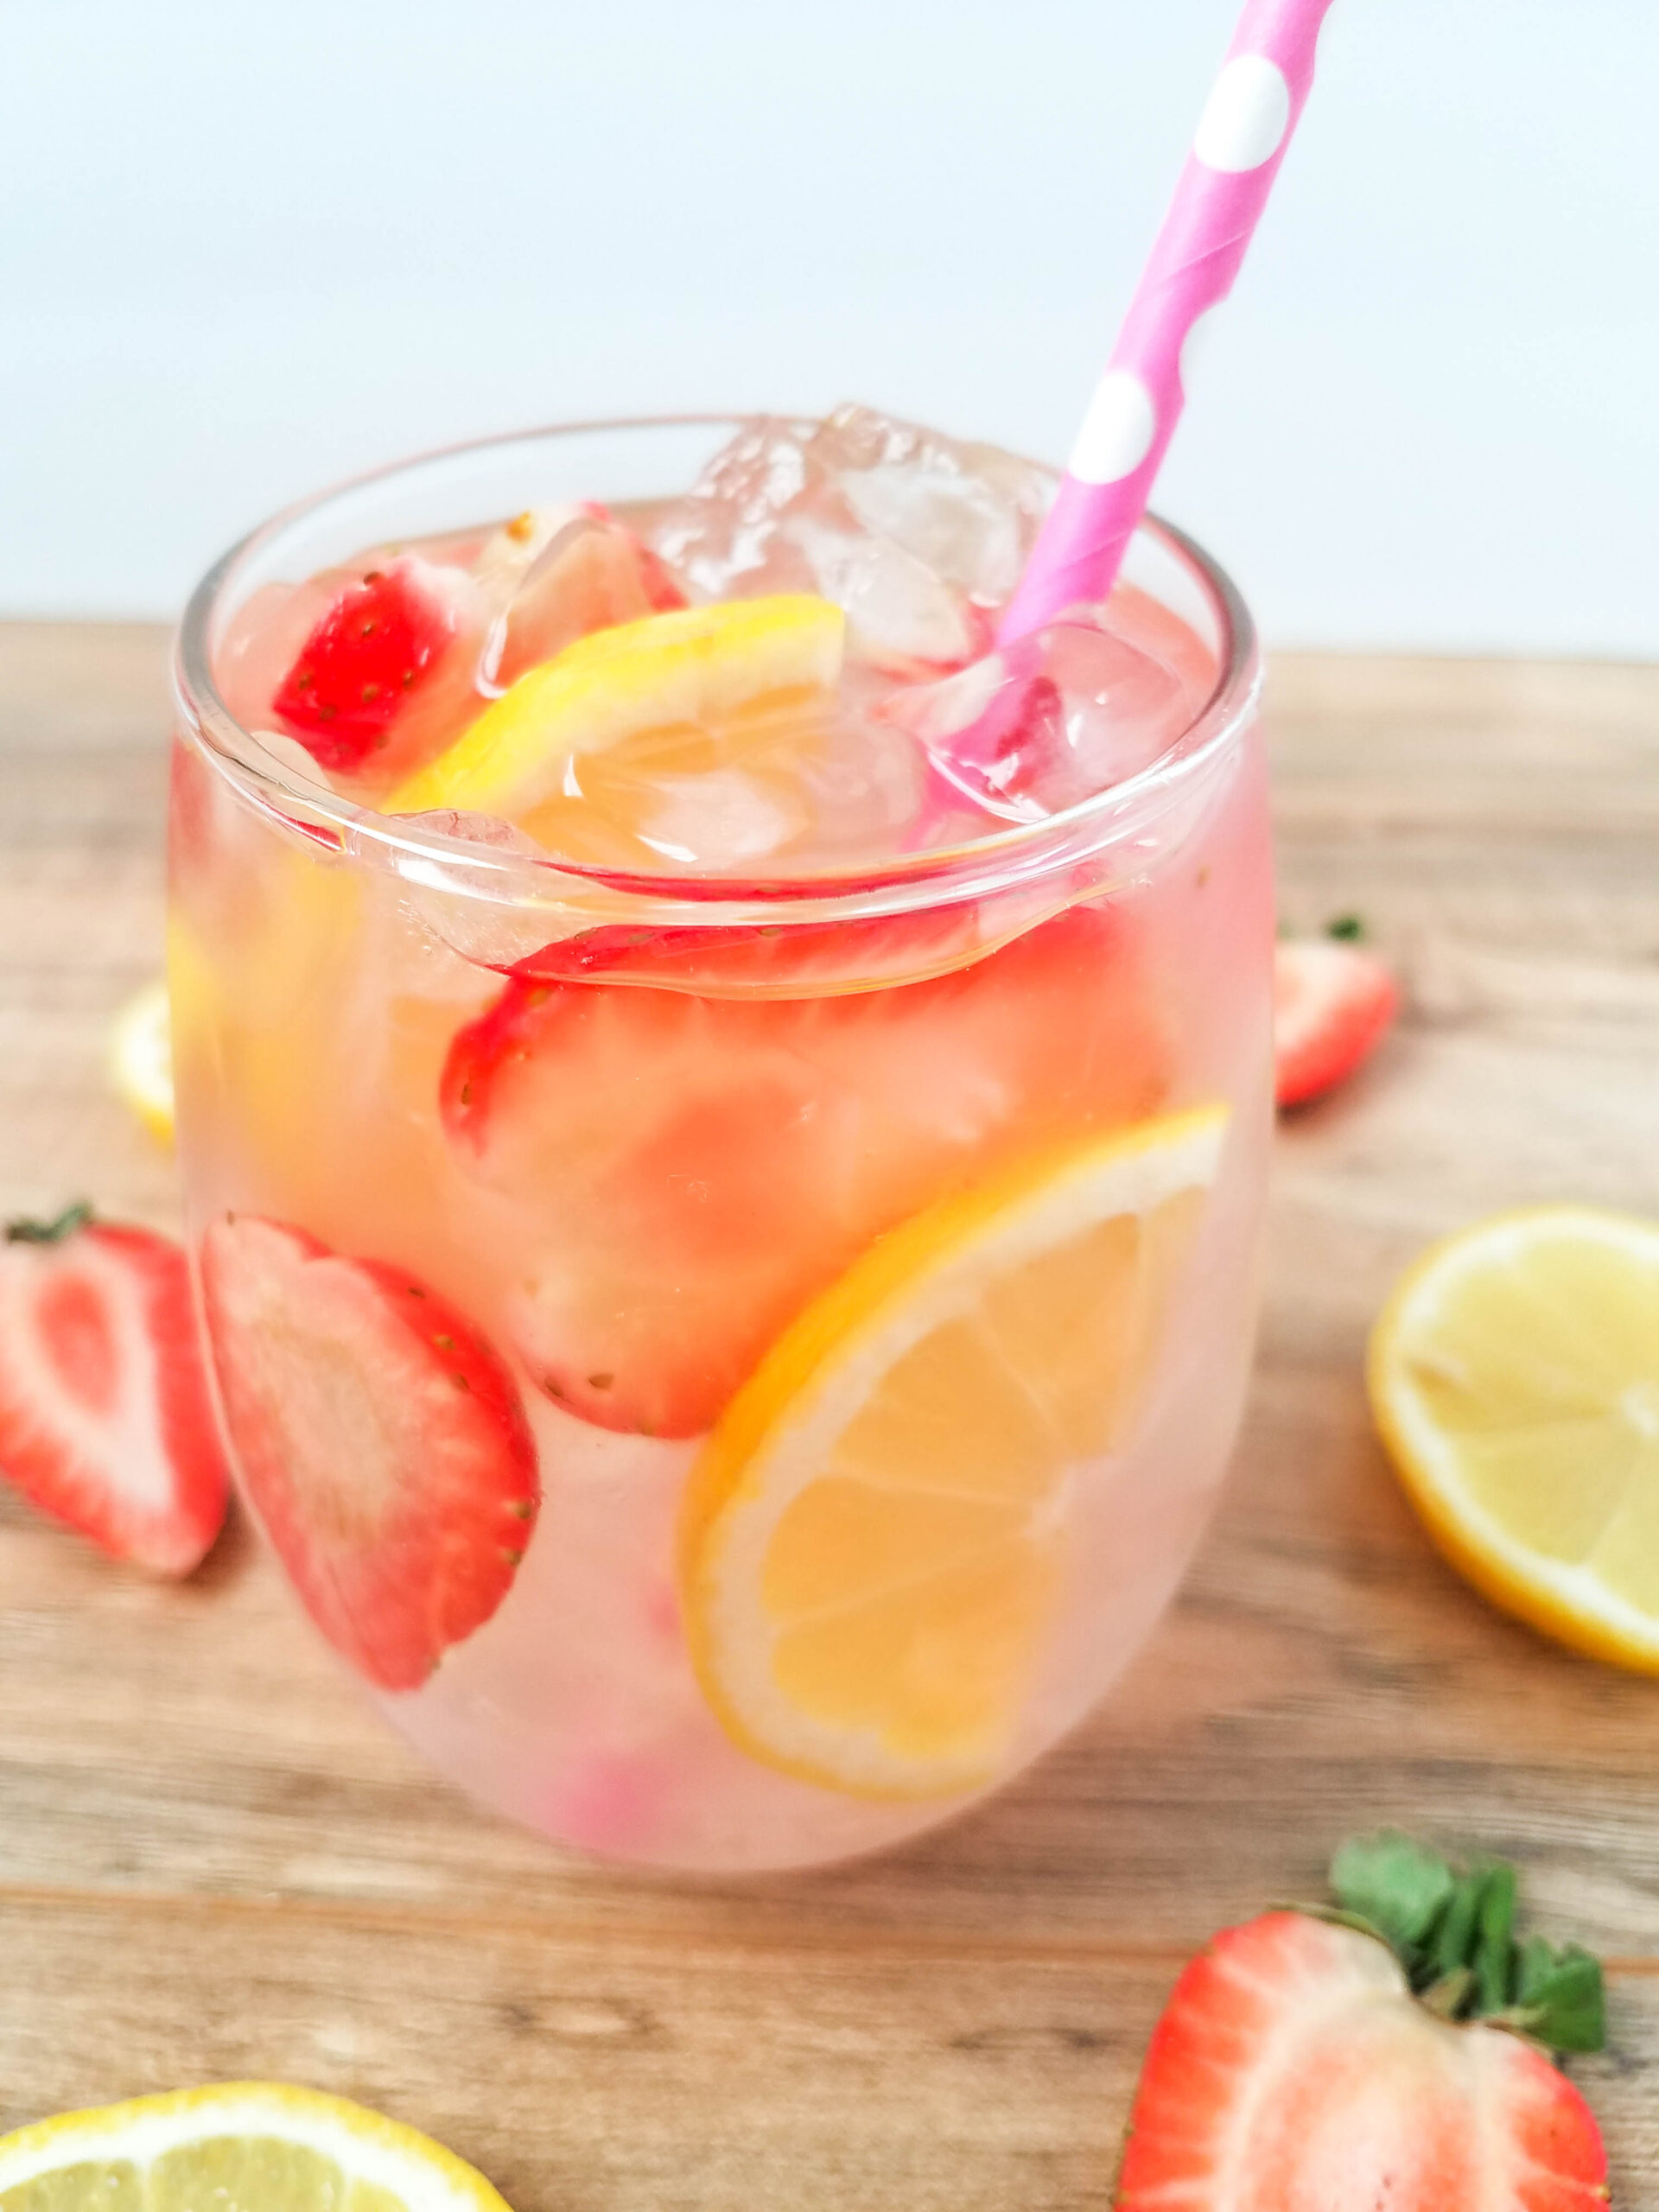 Pink Lemonade Moscato Cocktail Recipe - Outnumbered 3 to 1